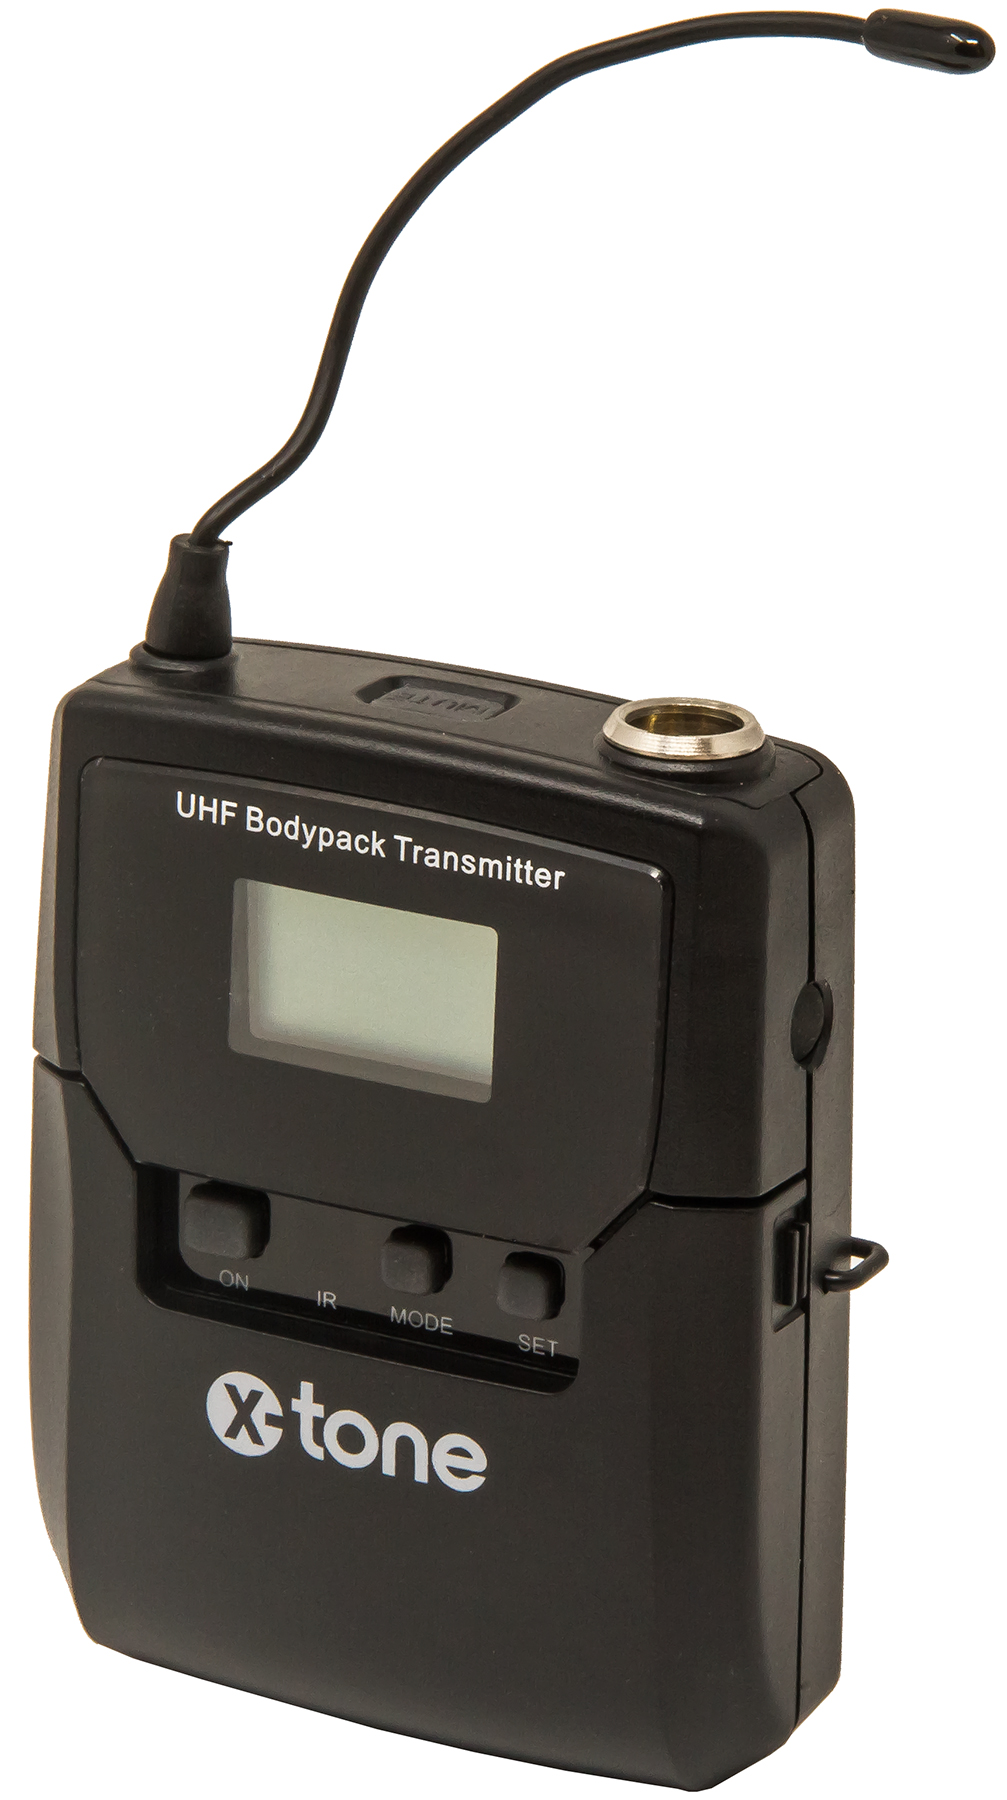 X-tone Xhf200l Systeme Hf Micro Cravate Multi Frequences - Wireless Lavalier microphone - Variation 4